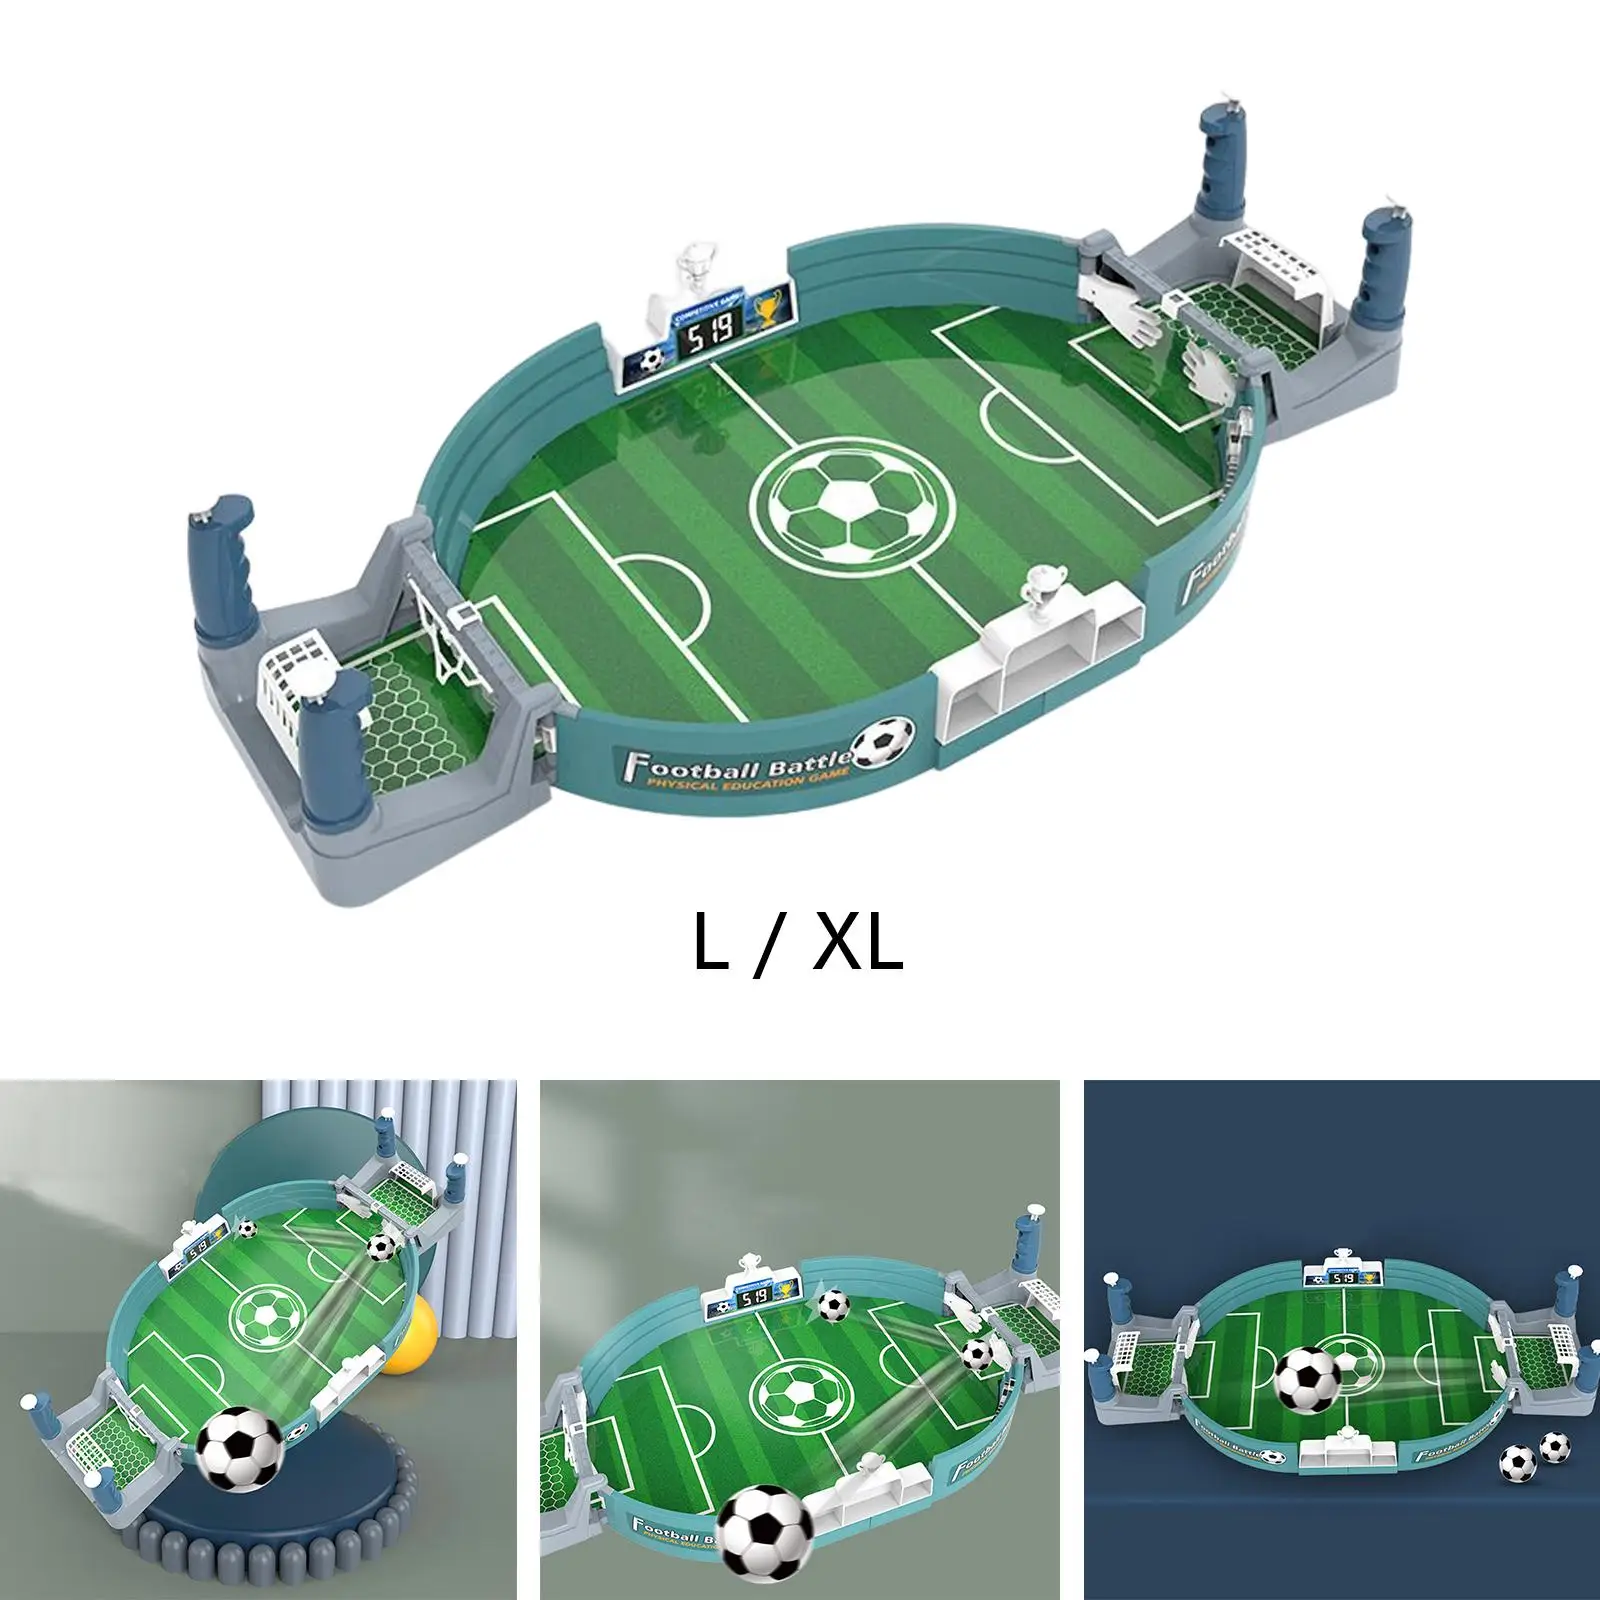 Desktop Football Board Games Kit Indoor Sport Toy Table Soccer Interactive for Girls Family Boys Adults